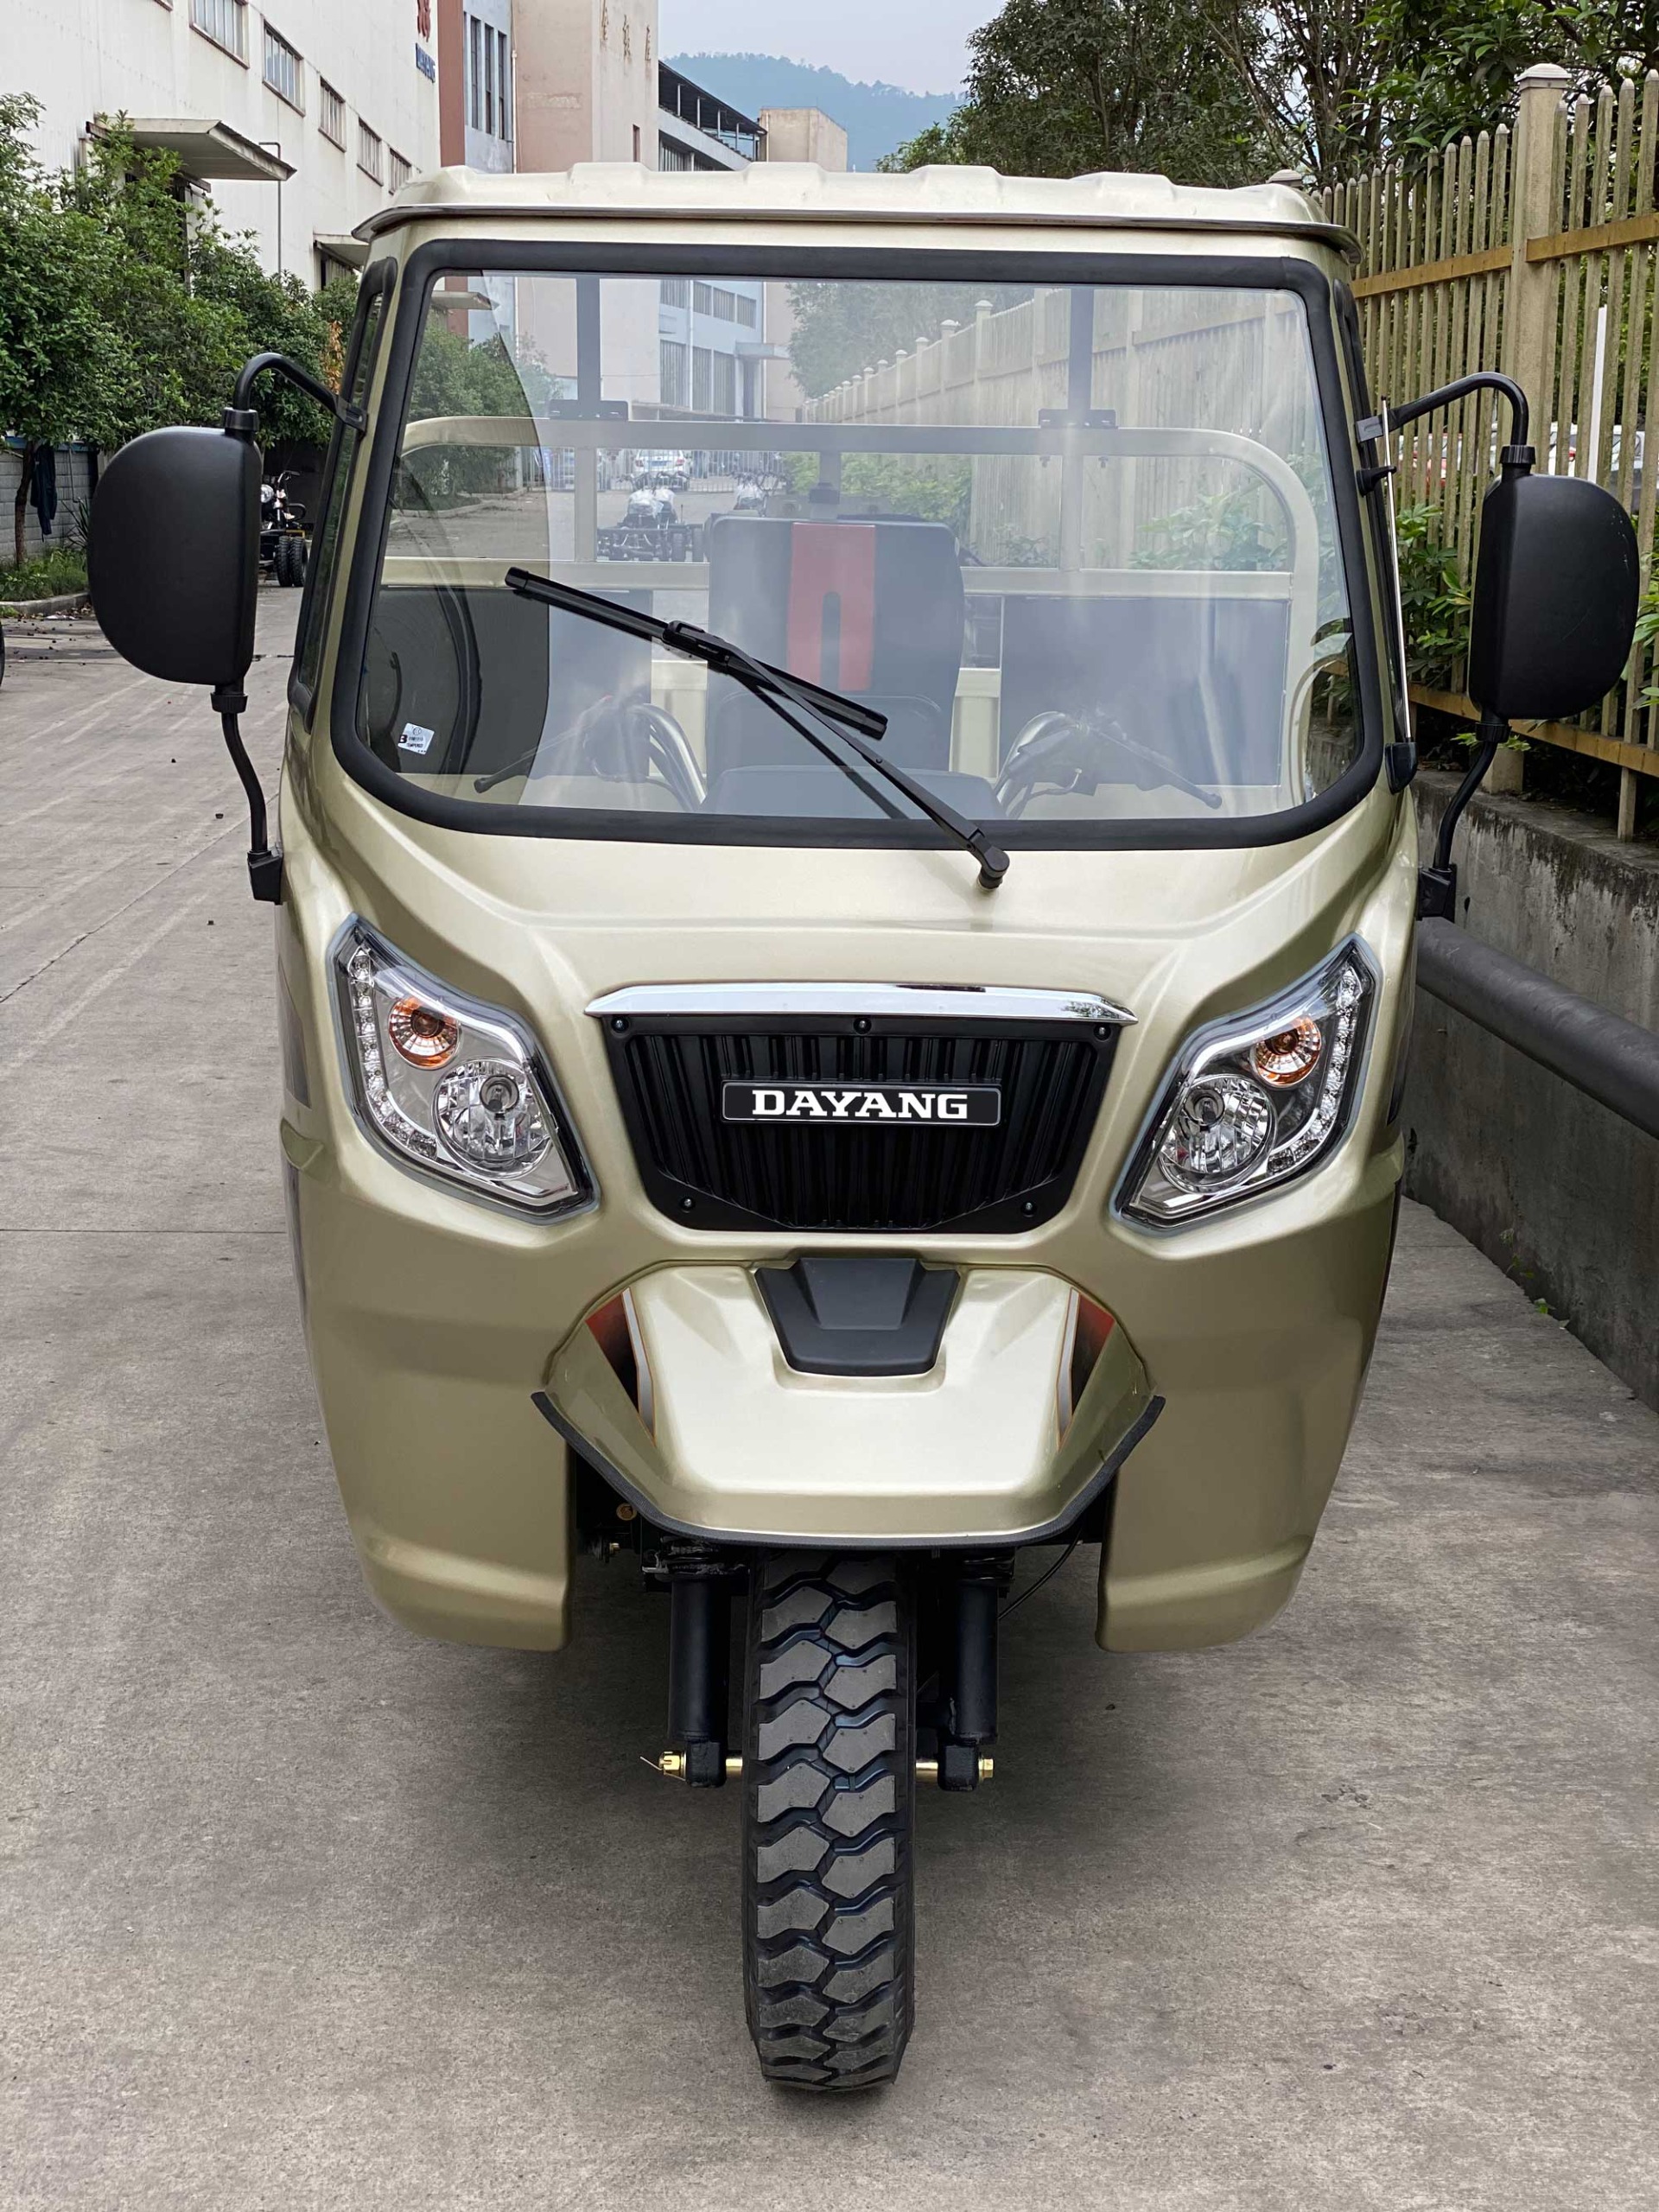 DY-SD1 DAYANG brand motorcycle sells well at Peru with 350CC powerful engine cargo tricycle